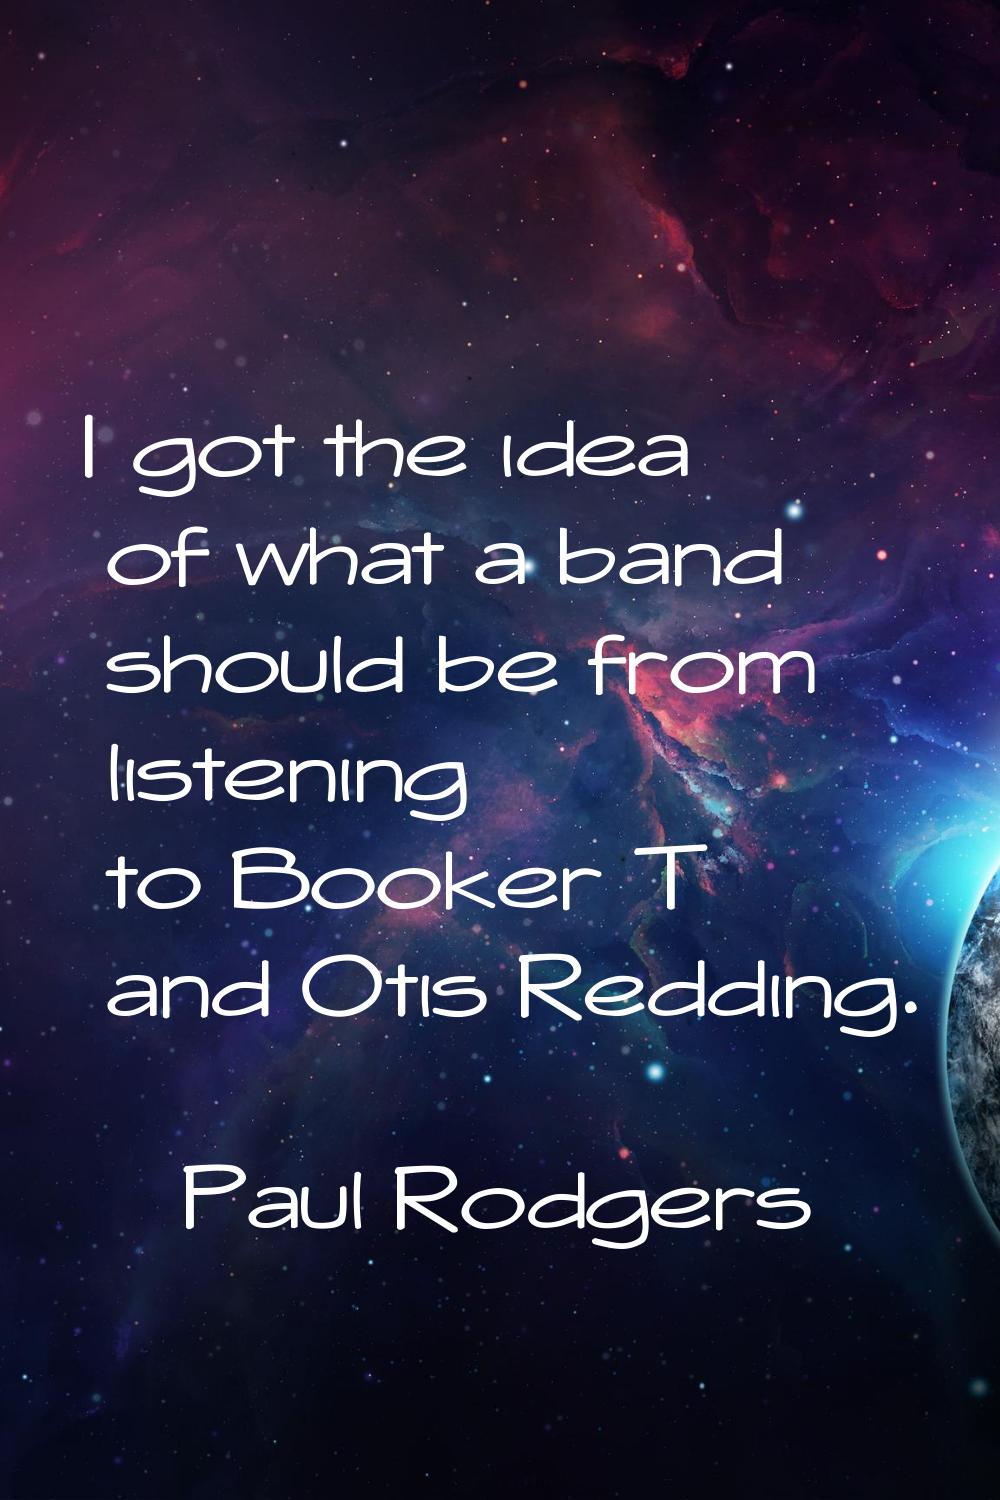 I got the idea of what a band should be from listening to Booker T and Otis Redding.